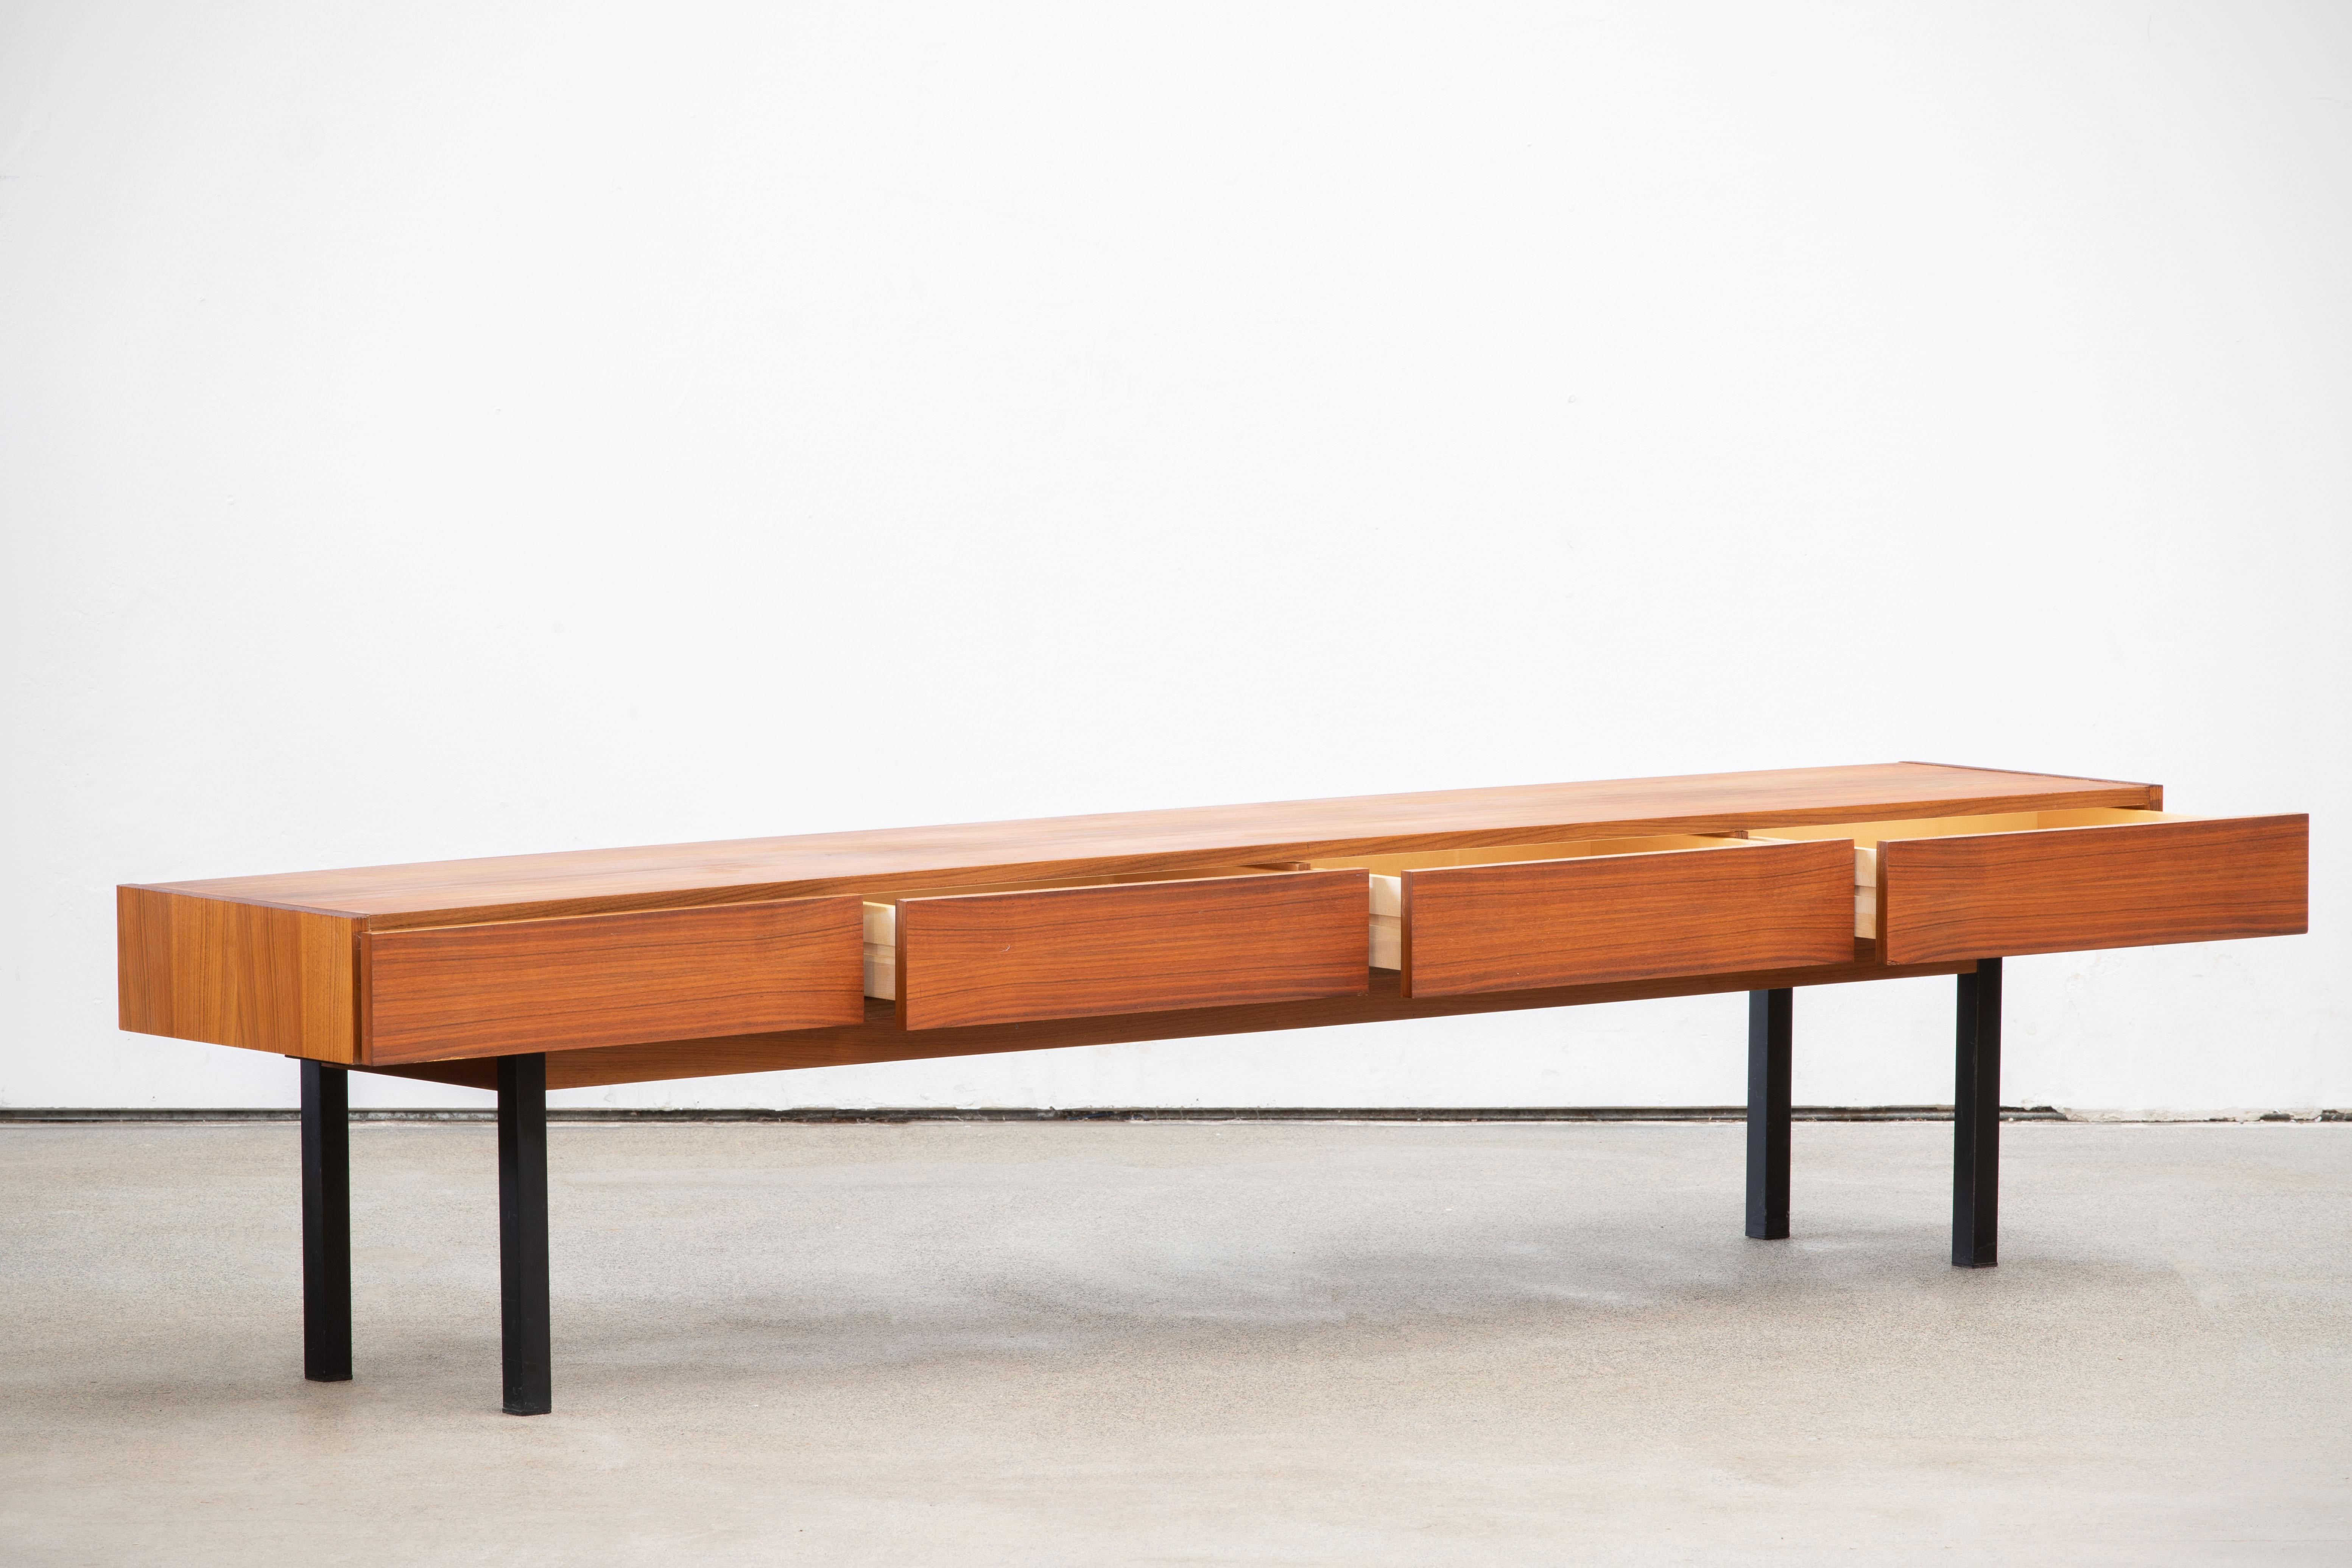 Midcentury teak sideboard from the 1960s. It is a shining example of the form and function synonymous with furniture of this era. Well-built, great design and lightness. Three drawers storage space. The minimal design and the warm tone combined with